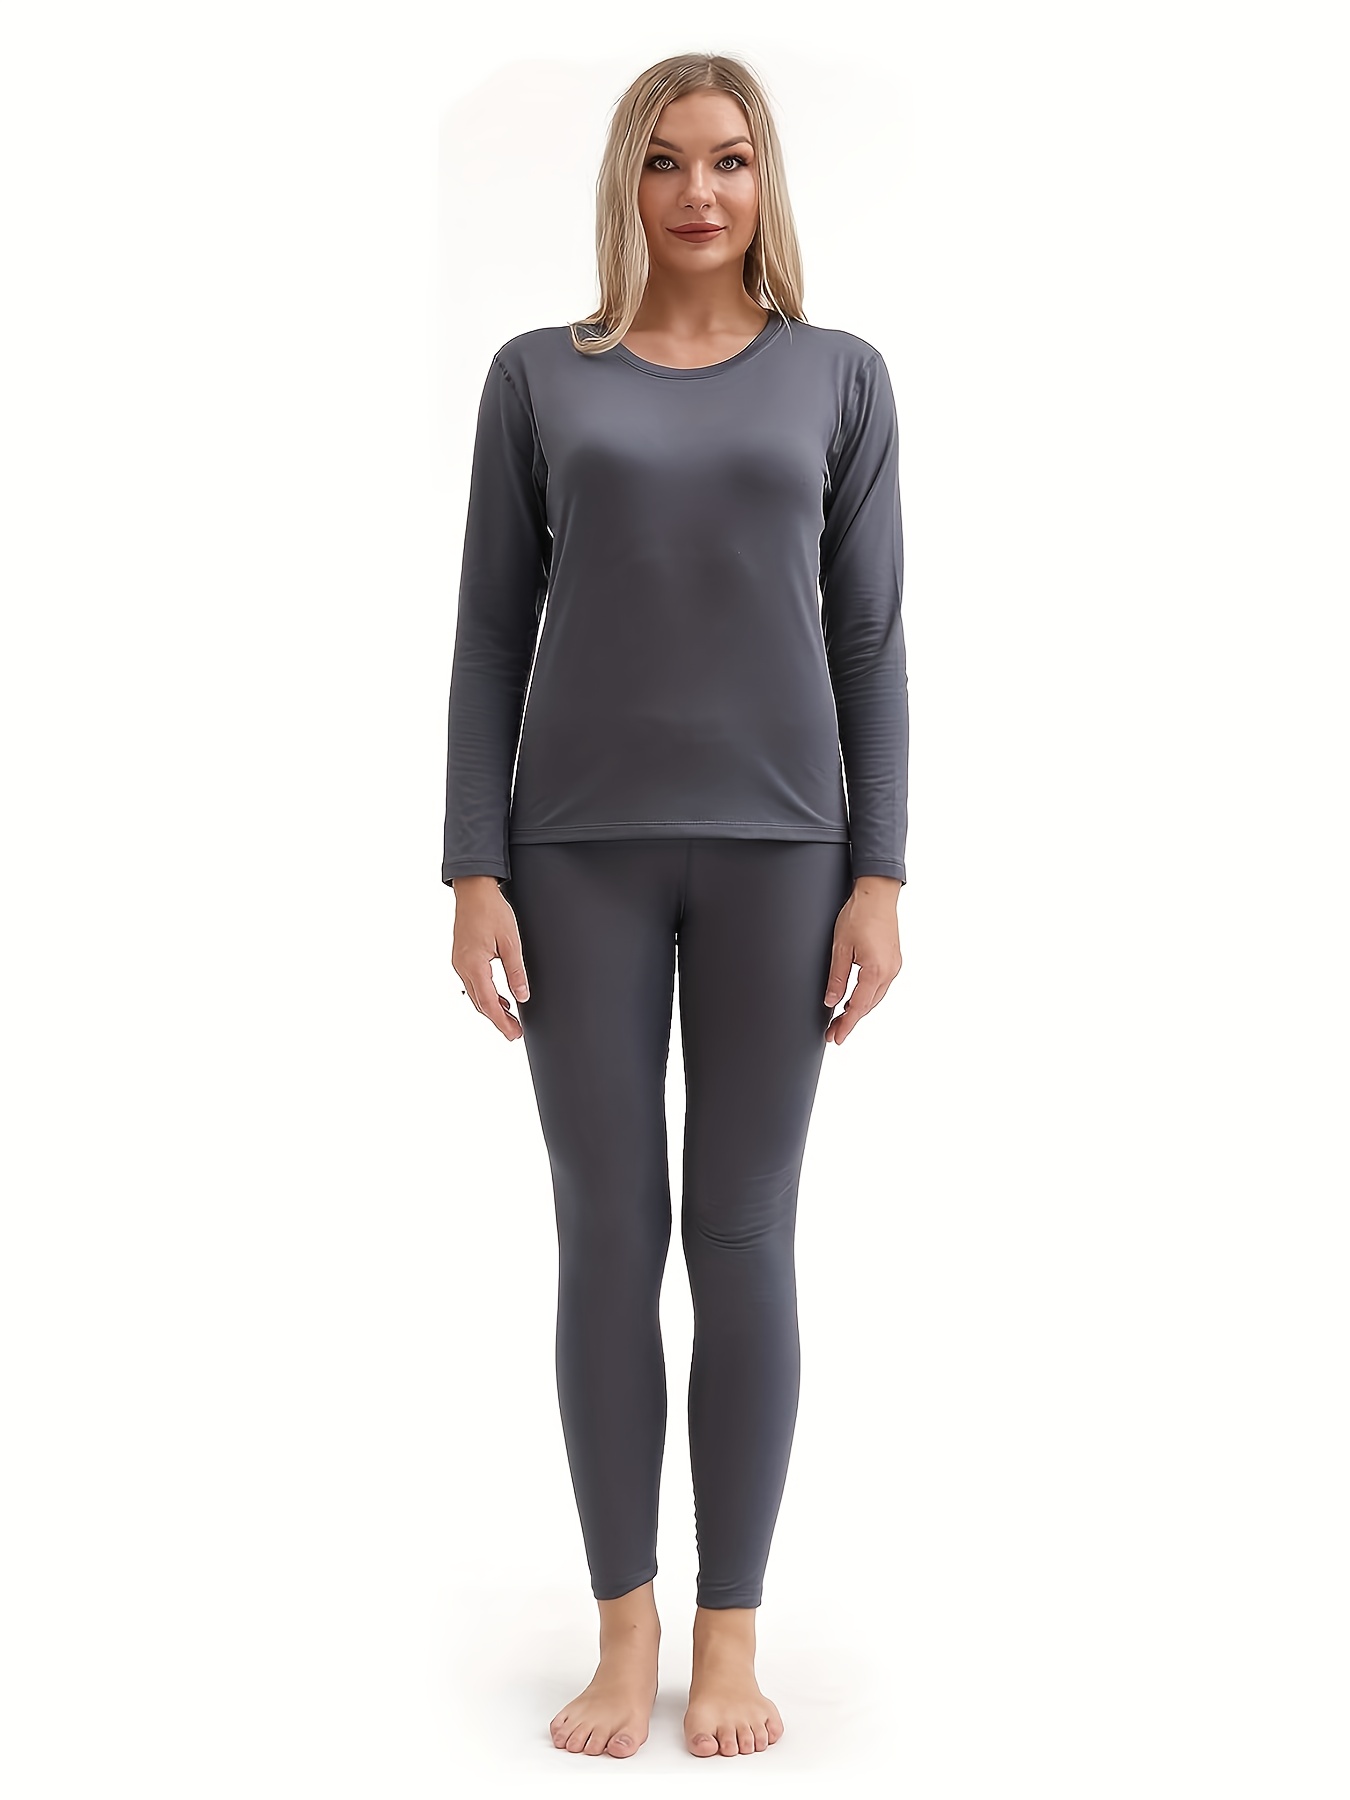 YOOY Women's Ski Thermal Underwear Set Quick Dry Funktion Activewear Ladies  Sports Long Sleeve Outdoors Shirts and Pants Rose M price in UAE,   UAE